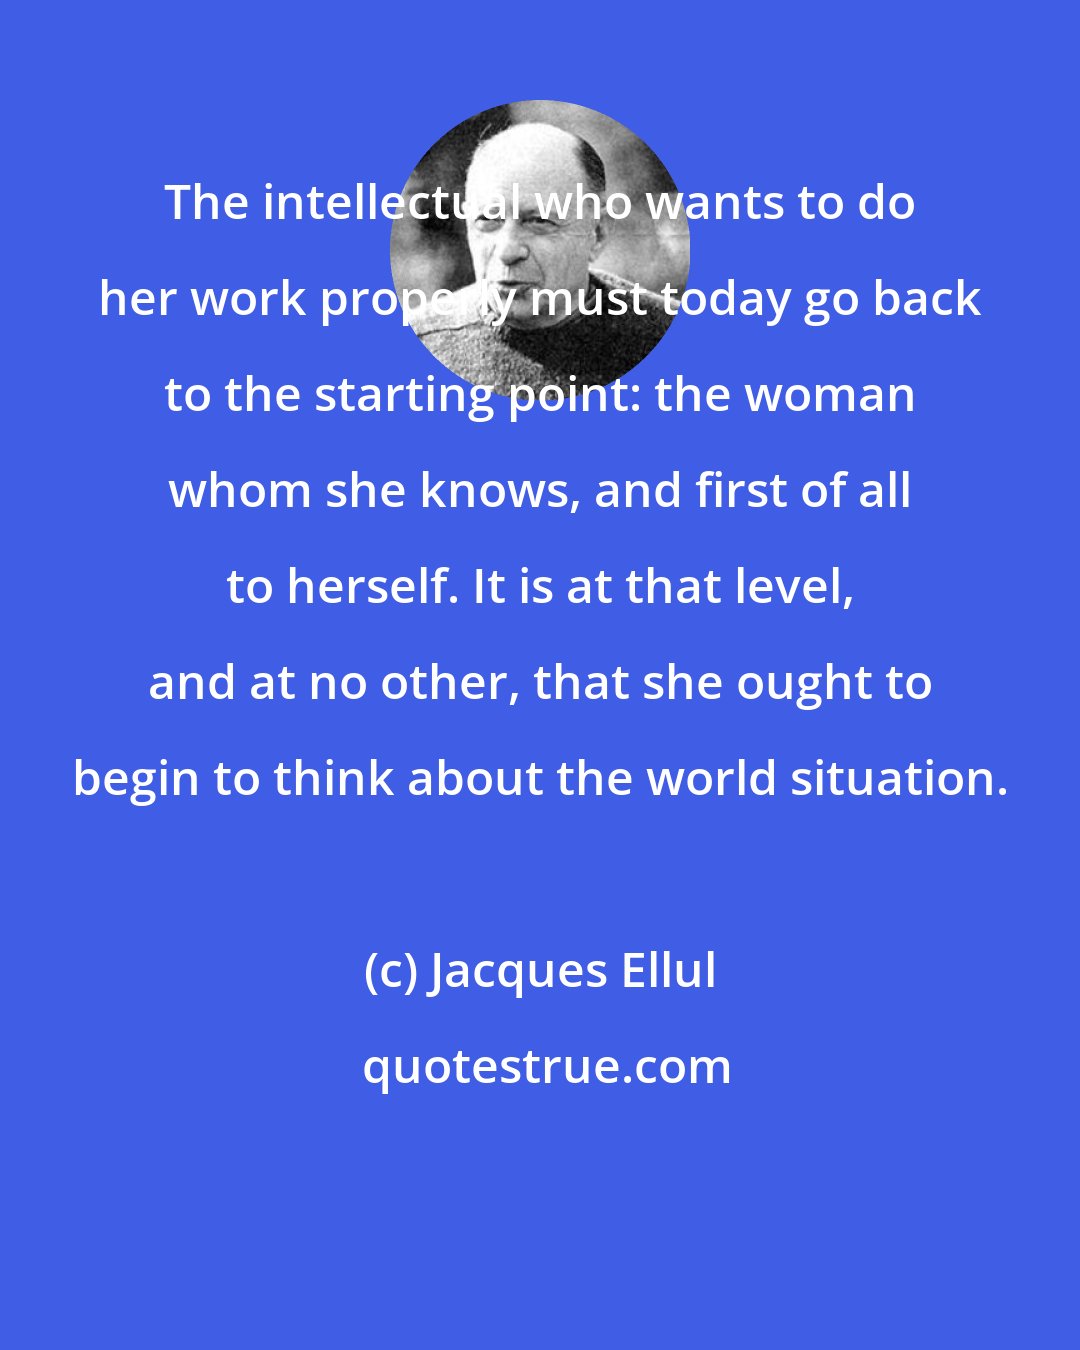 Jacques Ellul: The intellectual who wants to do her work properly must today go back to the starting point: the woman whom she knows, and first of all to herself. It is at that level, and at no other, that she ought to begin to think about the world situation.